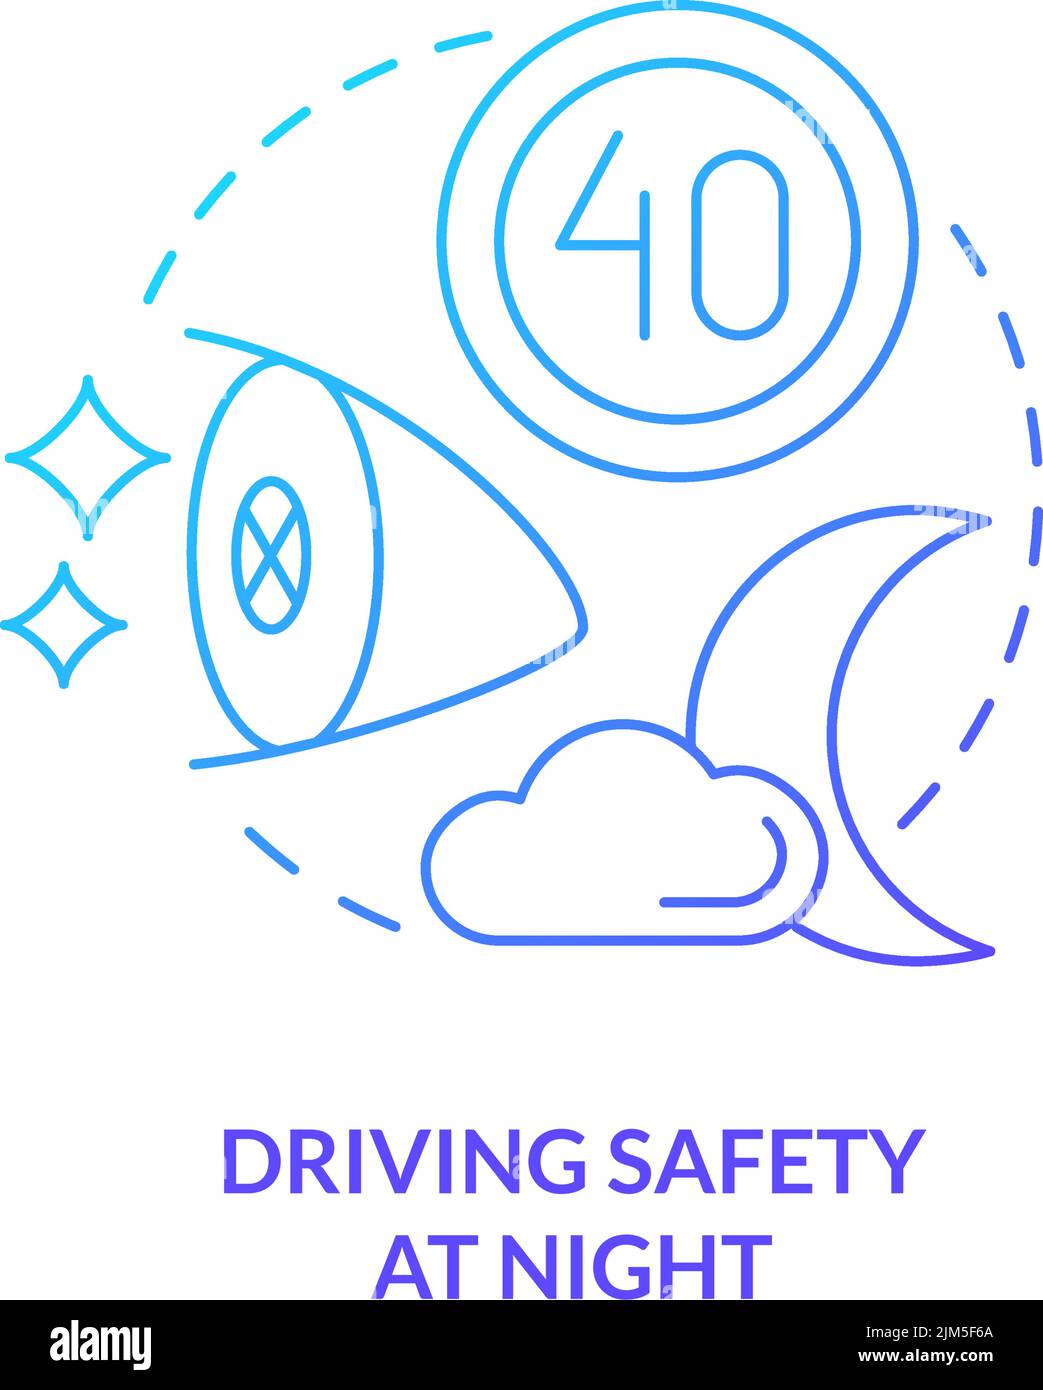 Driving safety at night blue gradient concept icon Stock Vector